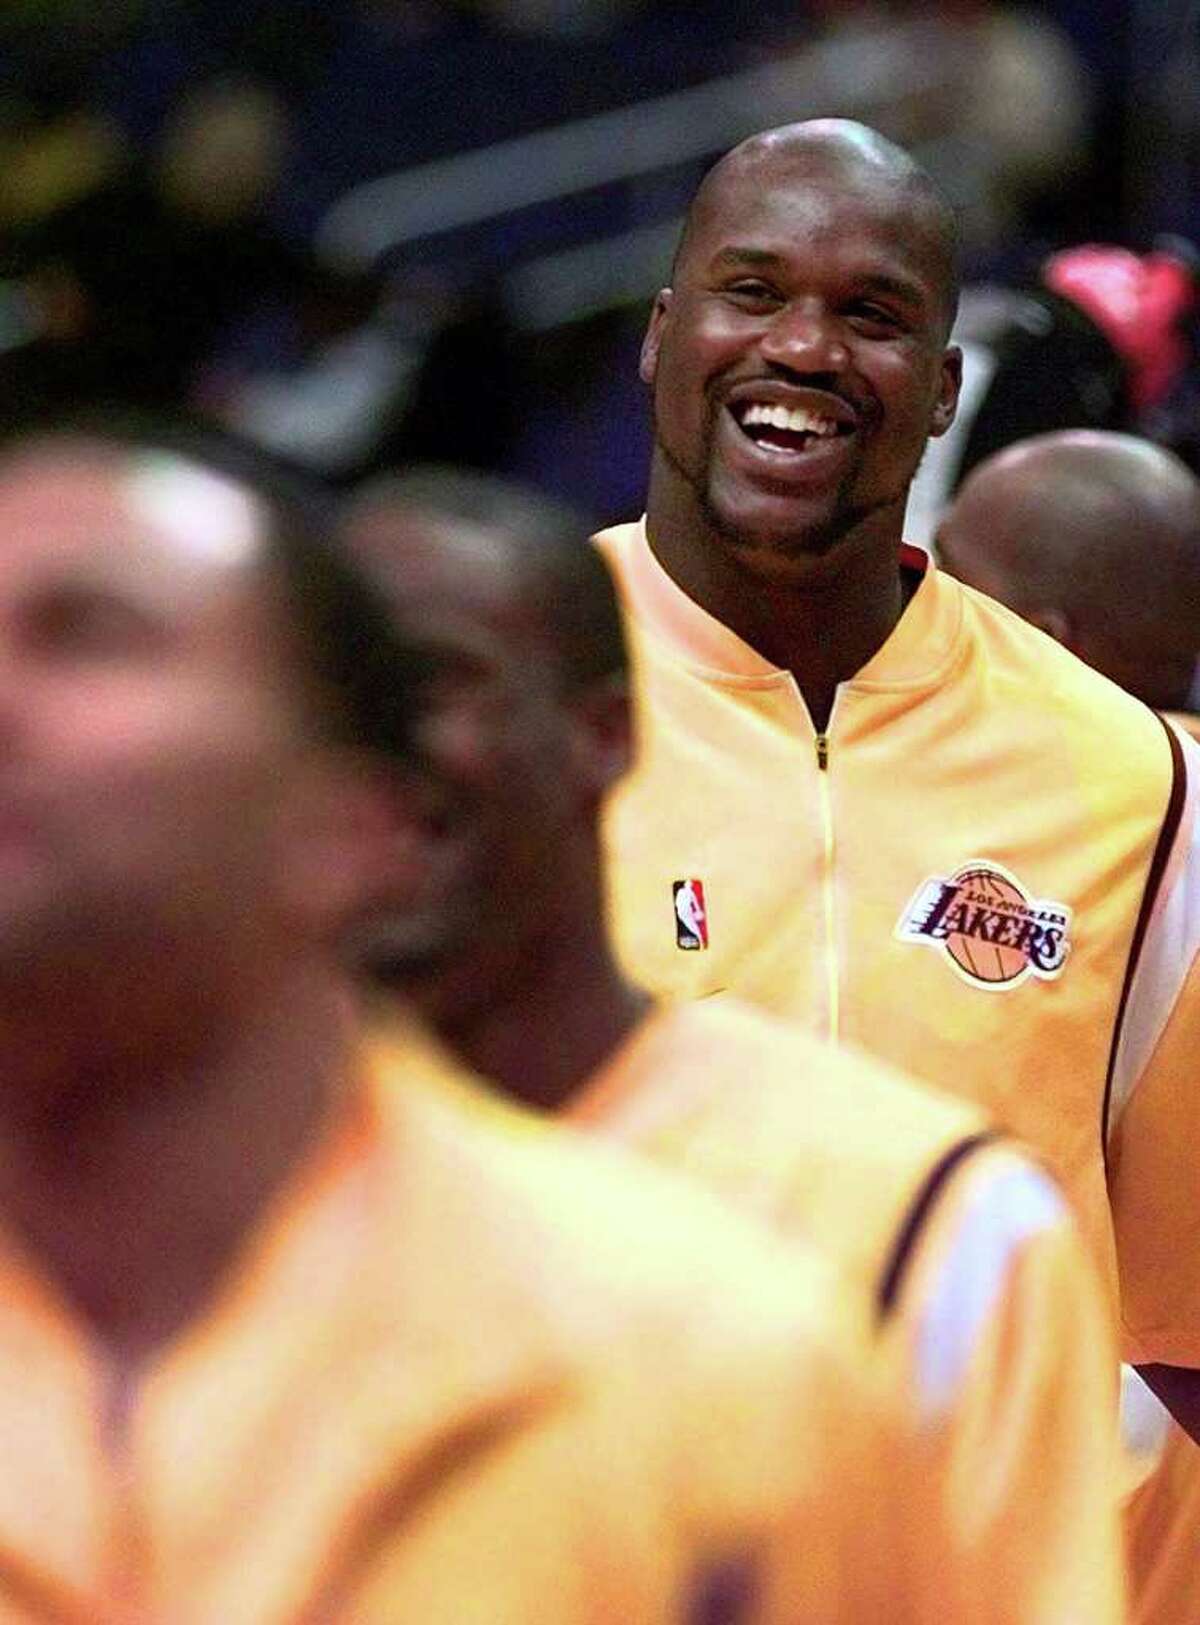 Former NBA All-Star and current TNT analyst Shaquille O'Neal